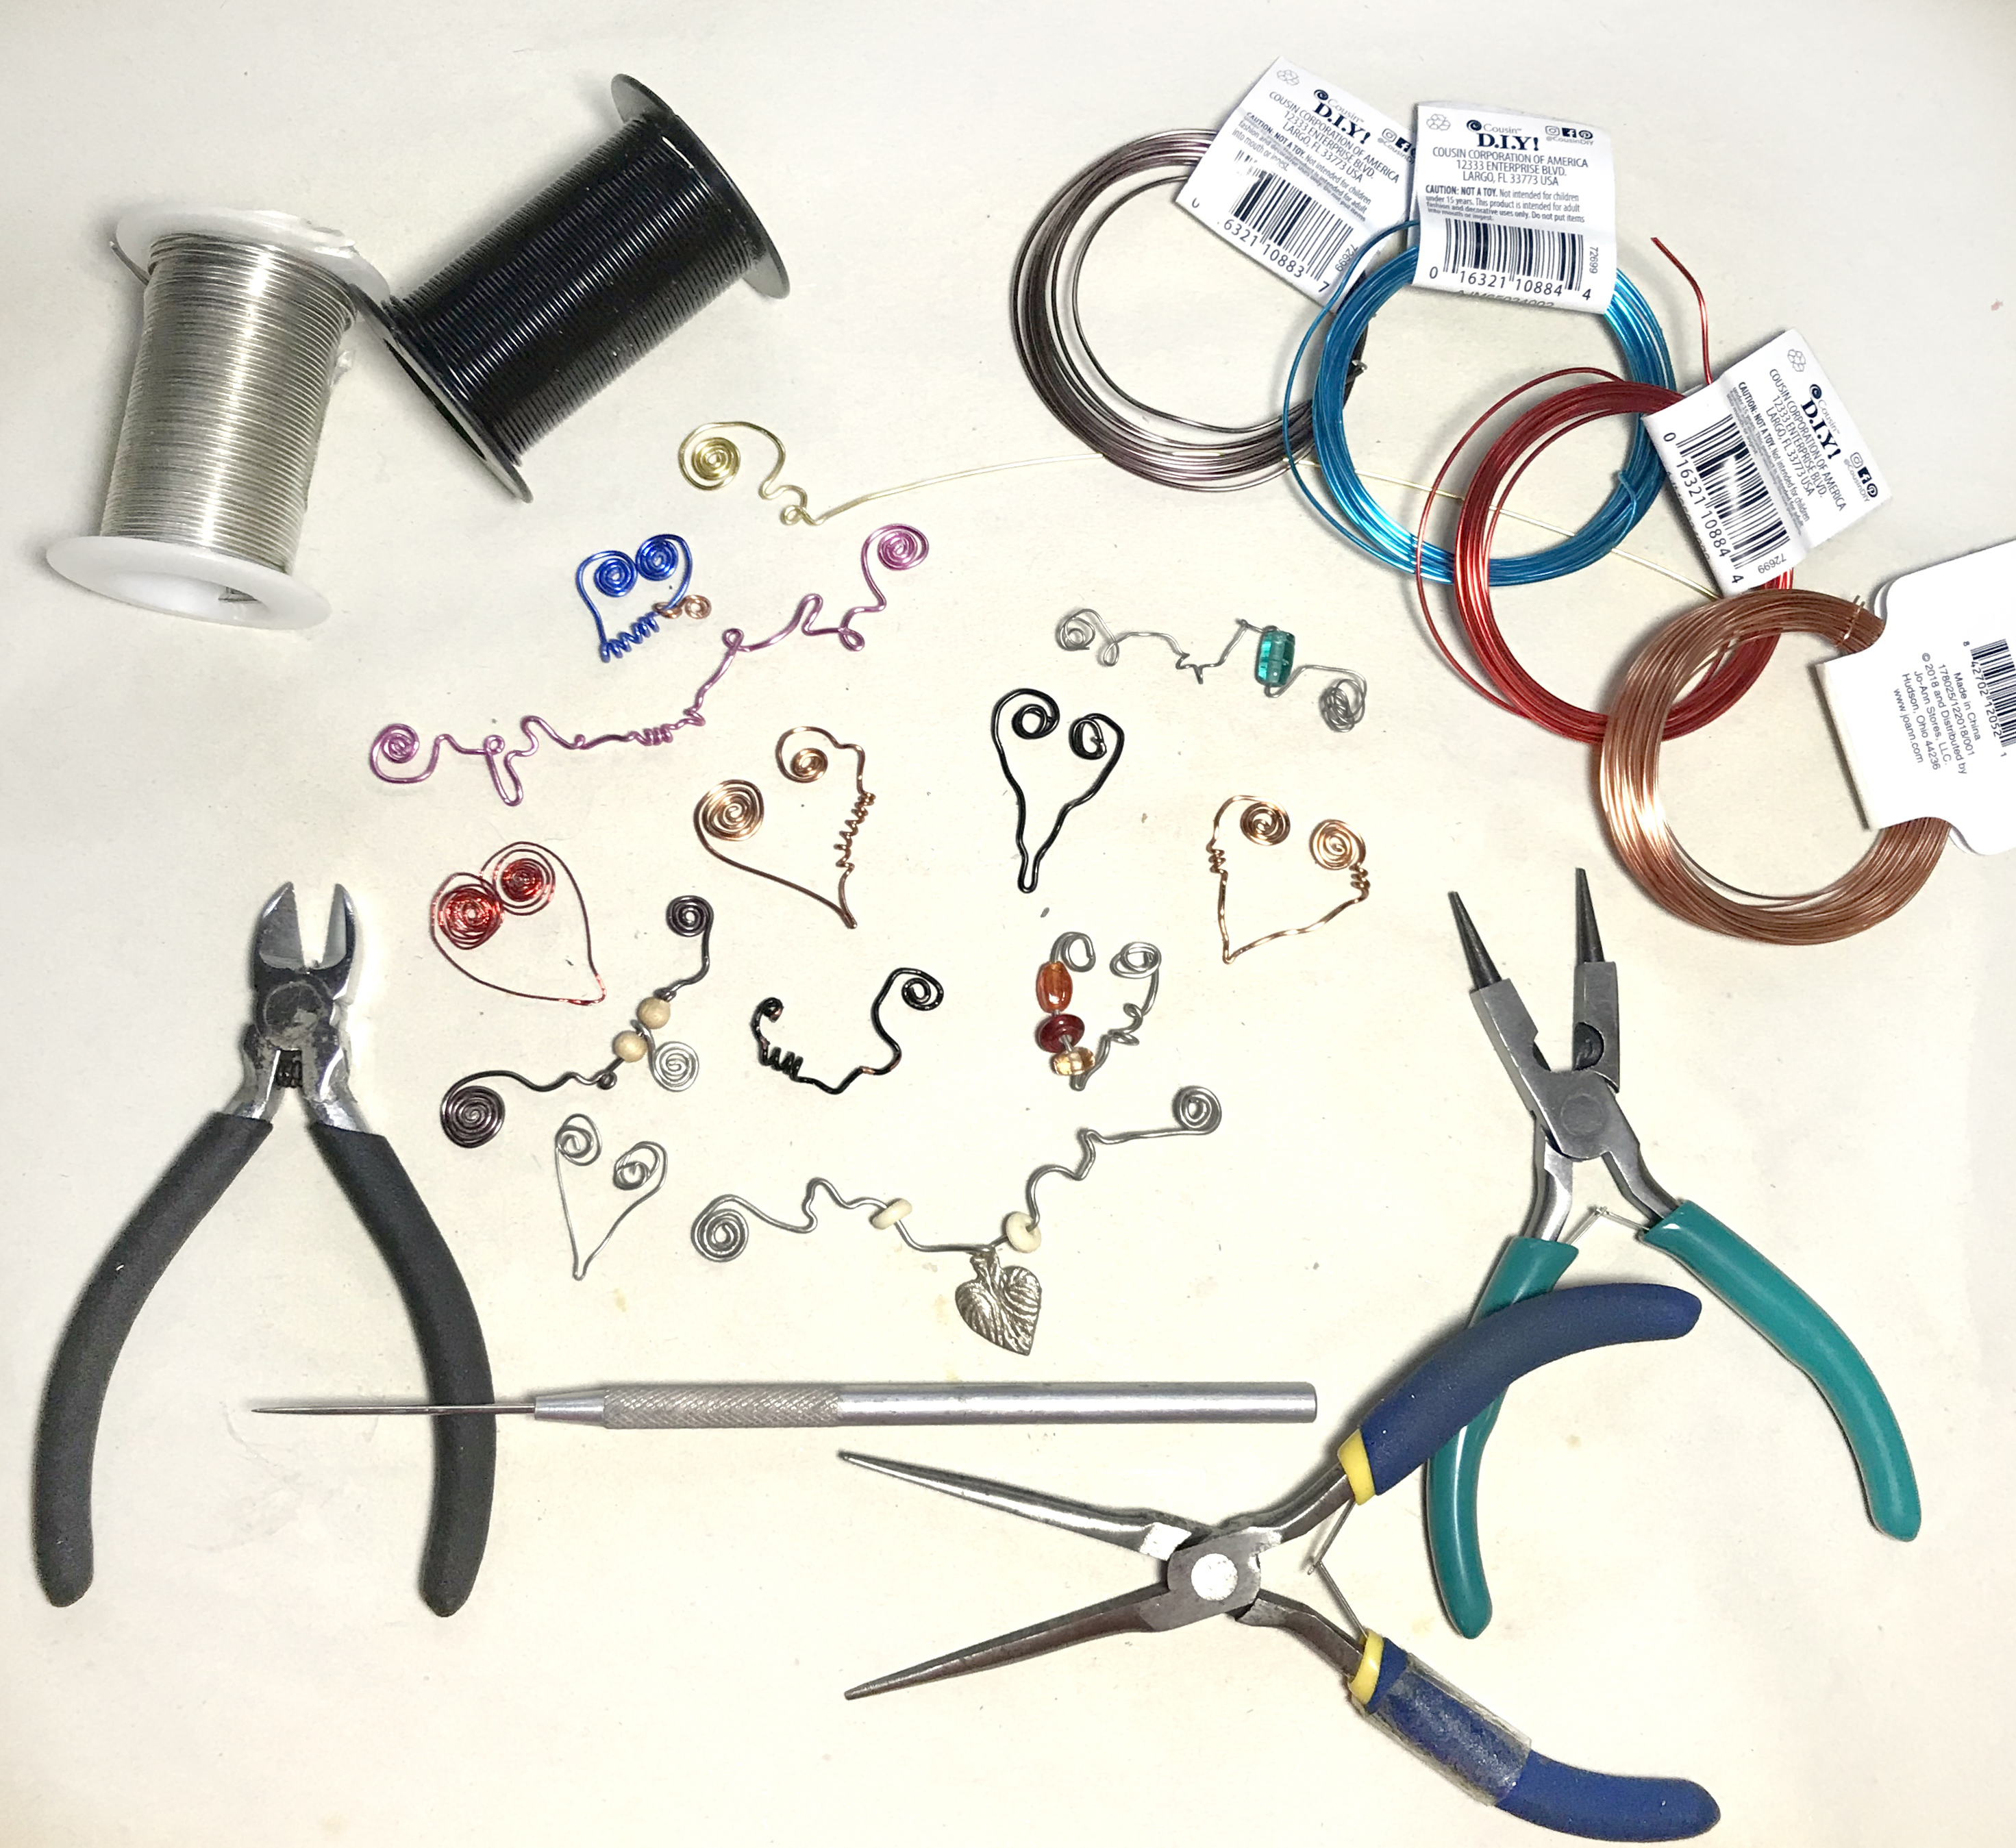 Jewelry tools and wire